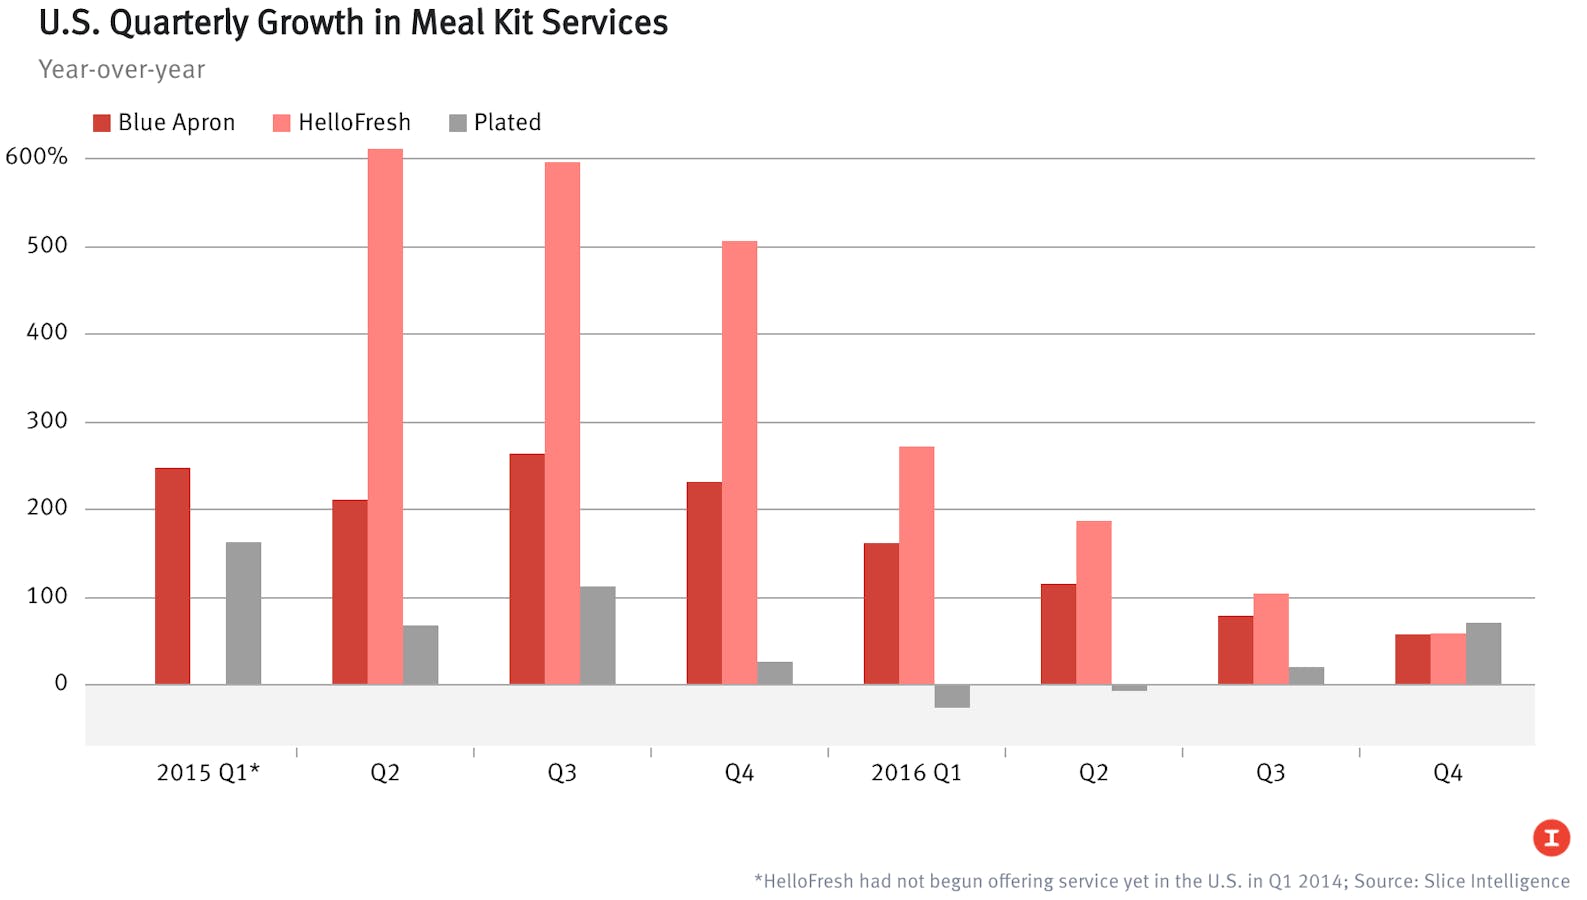 *No growth data available for HelloFresh in Q1 2015; Source: Slice Intelligence